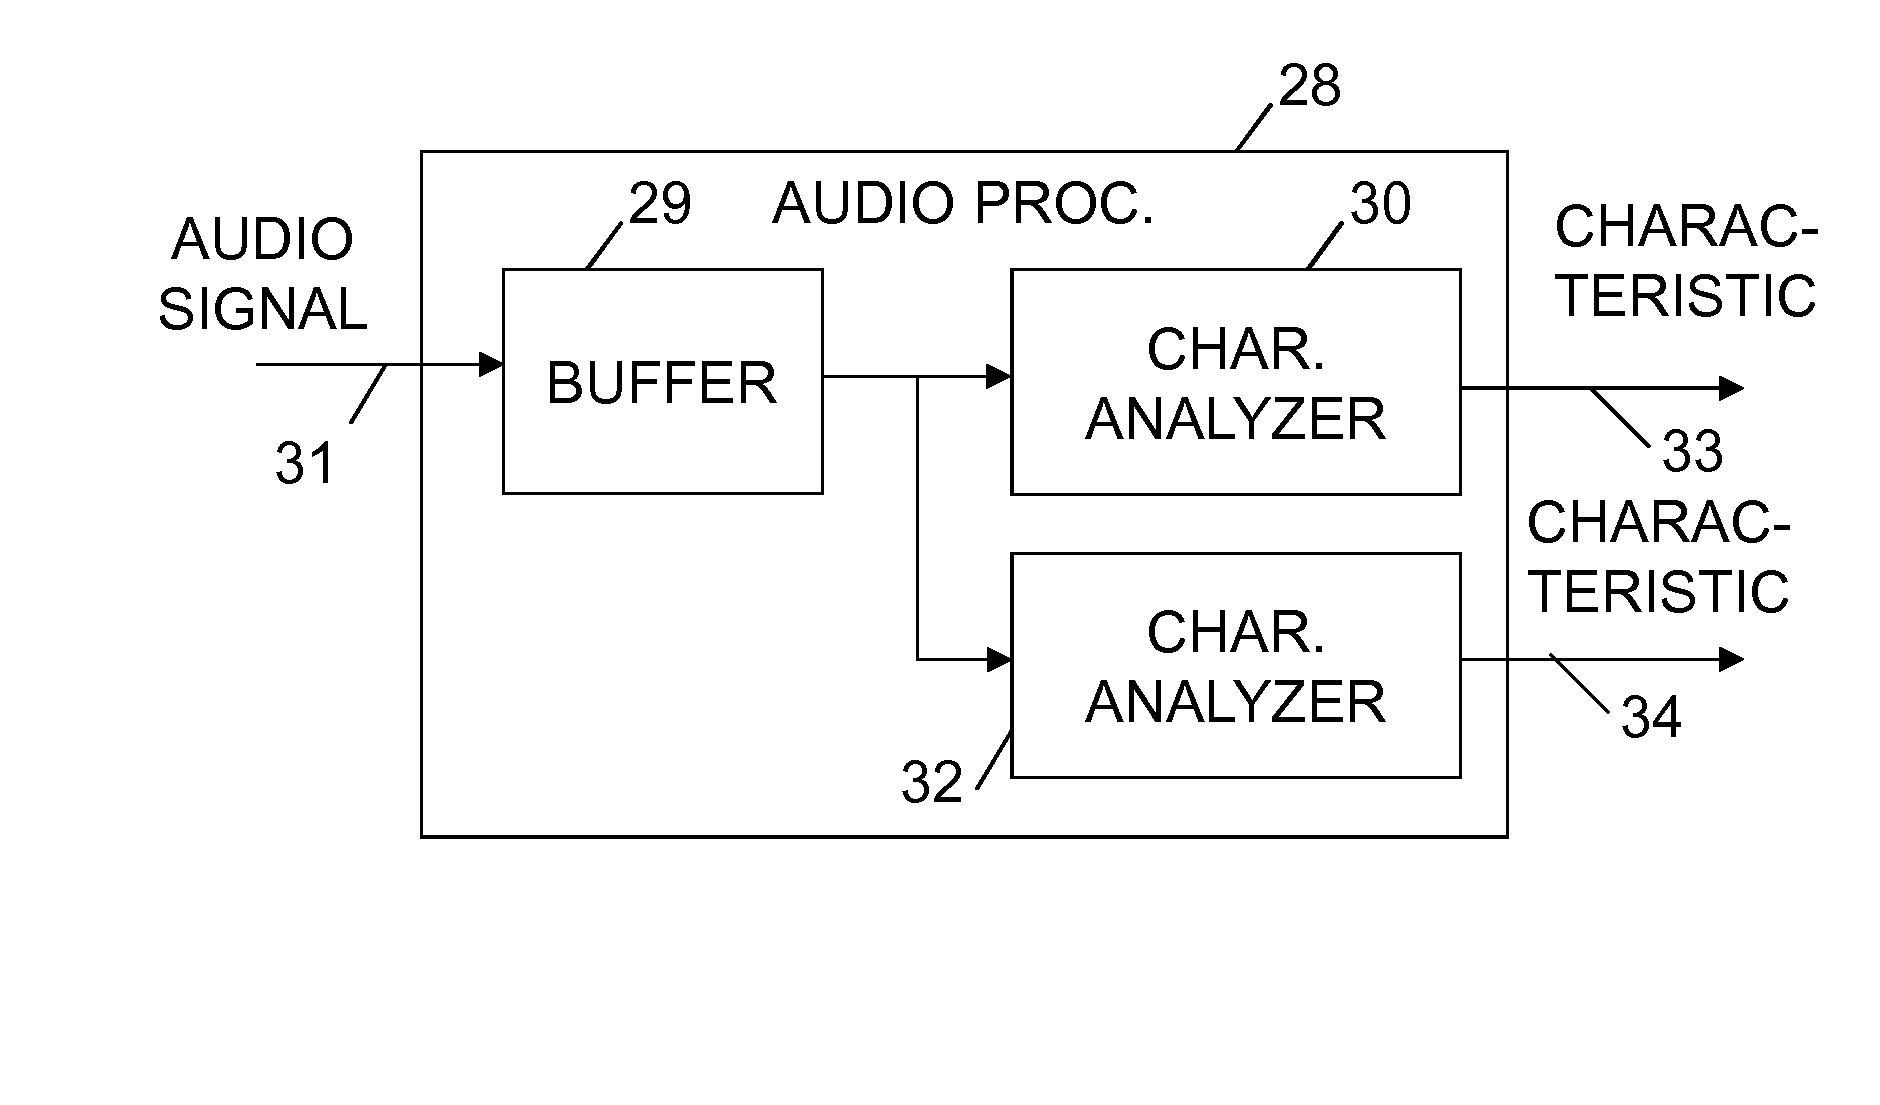 User Interface Using Sounds to Control a Lighting System